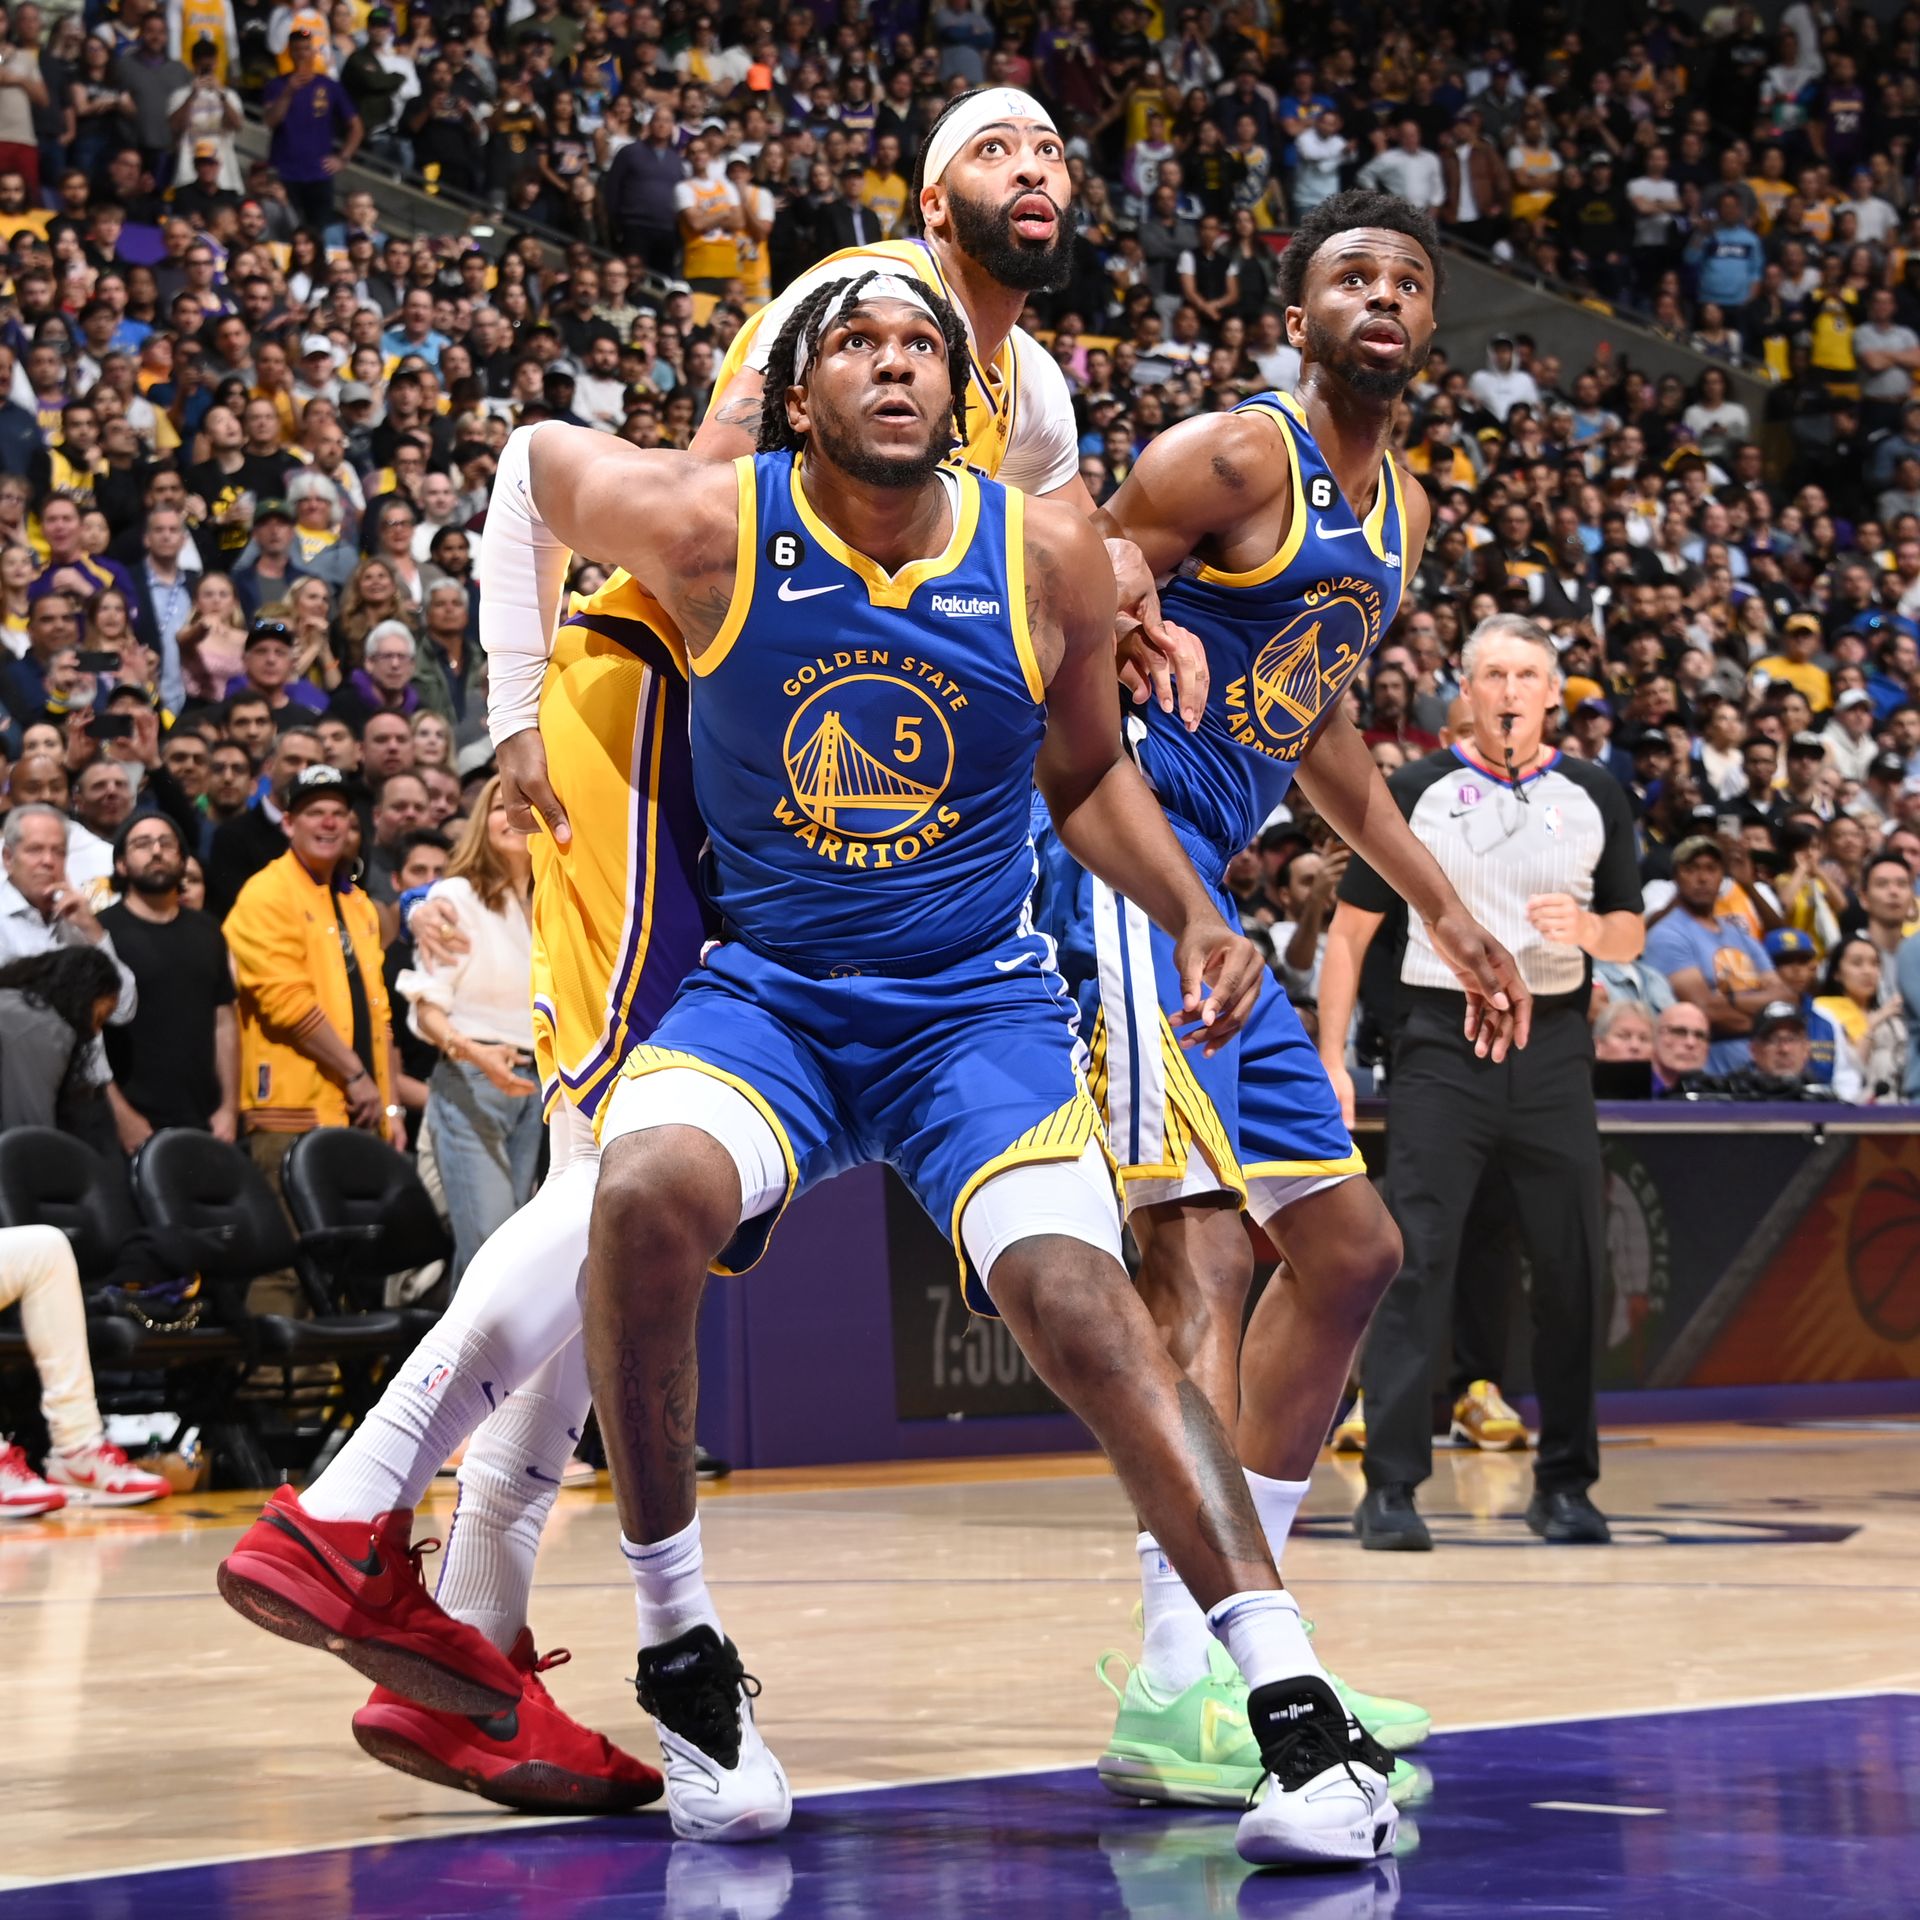 For the Golden State Warriors and the NBA, music is in the game